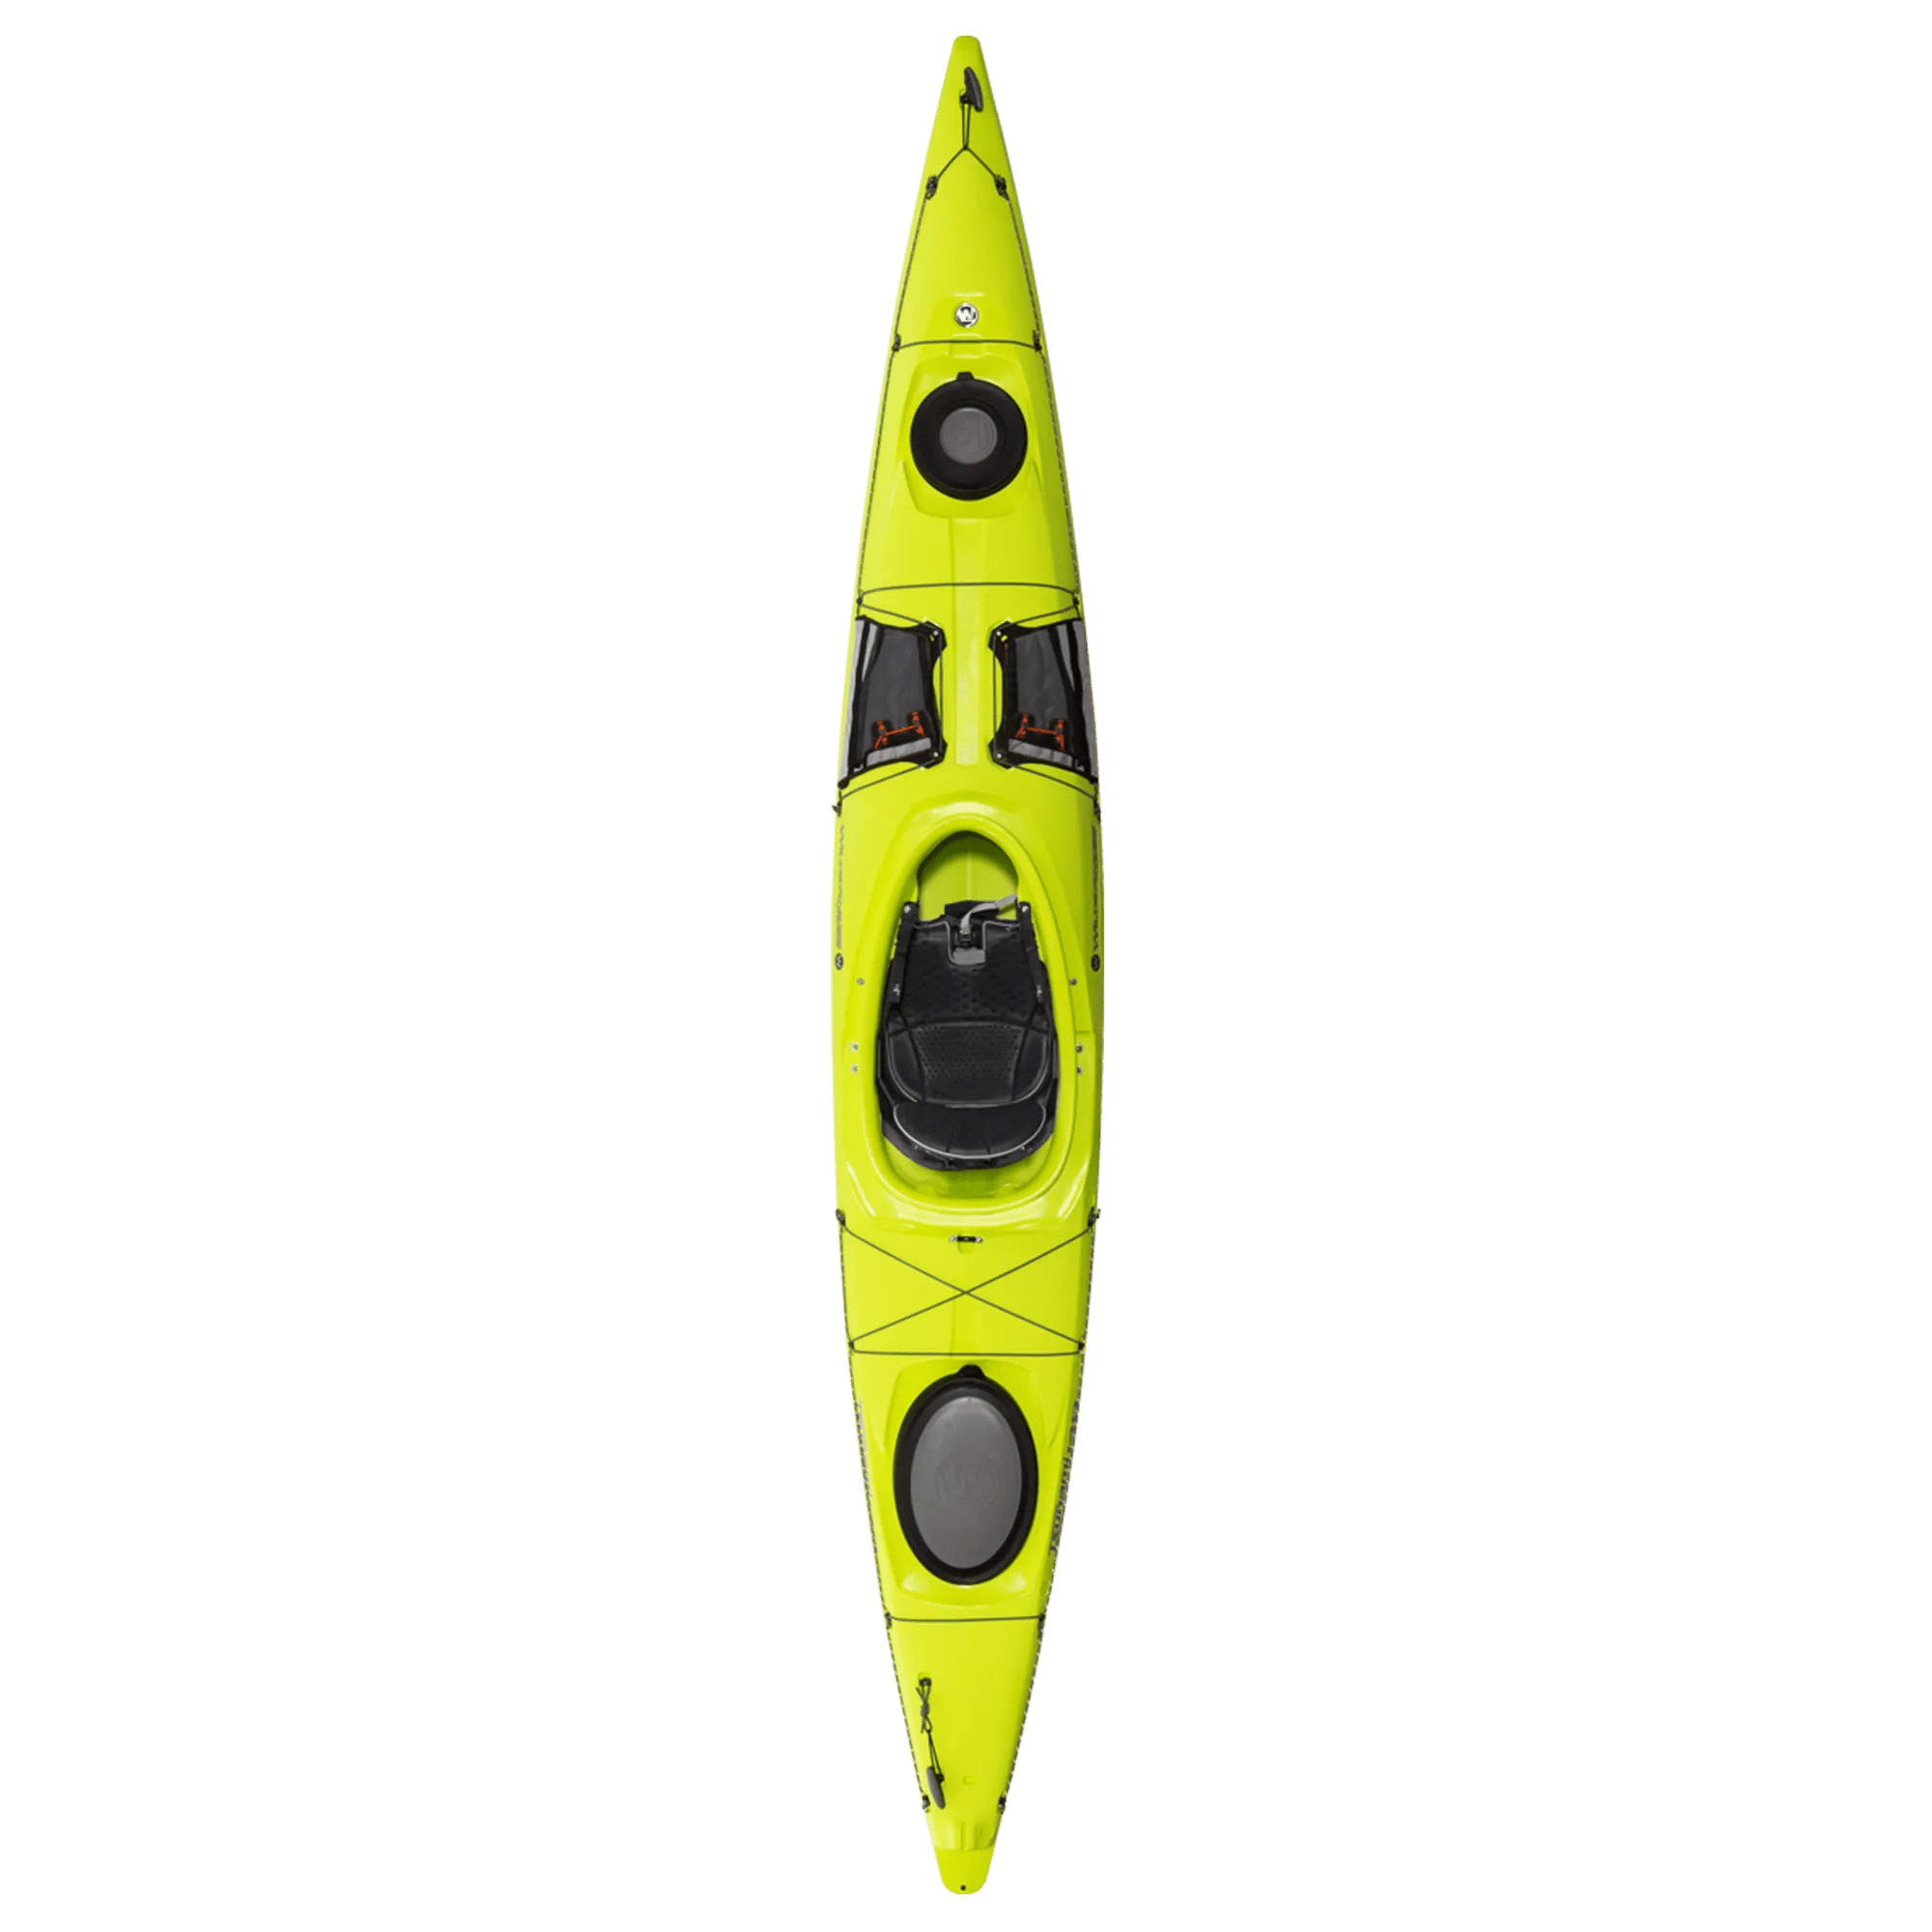 WILDERNESS SYSTEMS - Tsunami 140 Day Touring Kayak - Discontinued color/model - Yellow - 9720408180 - 